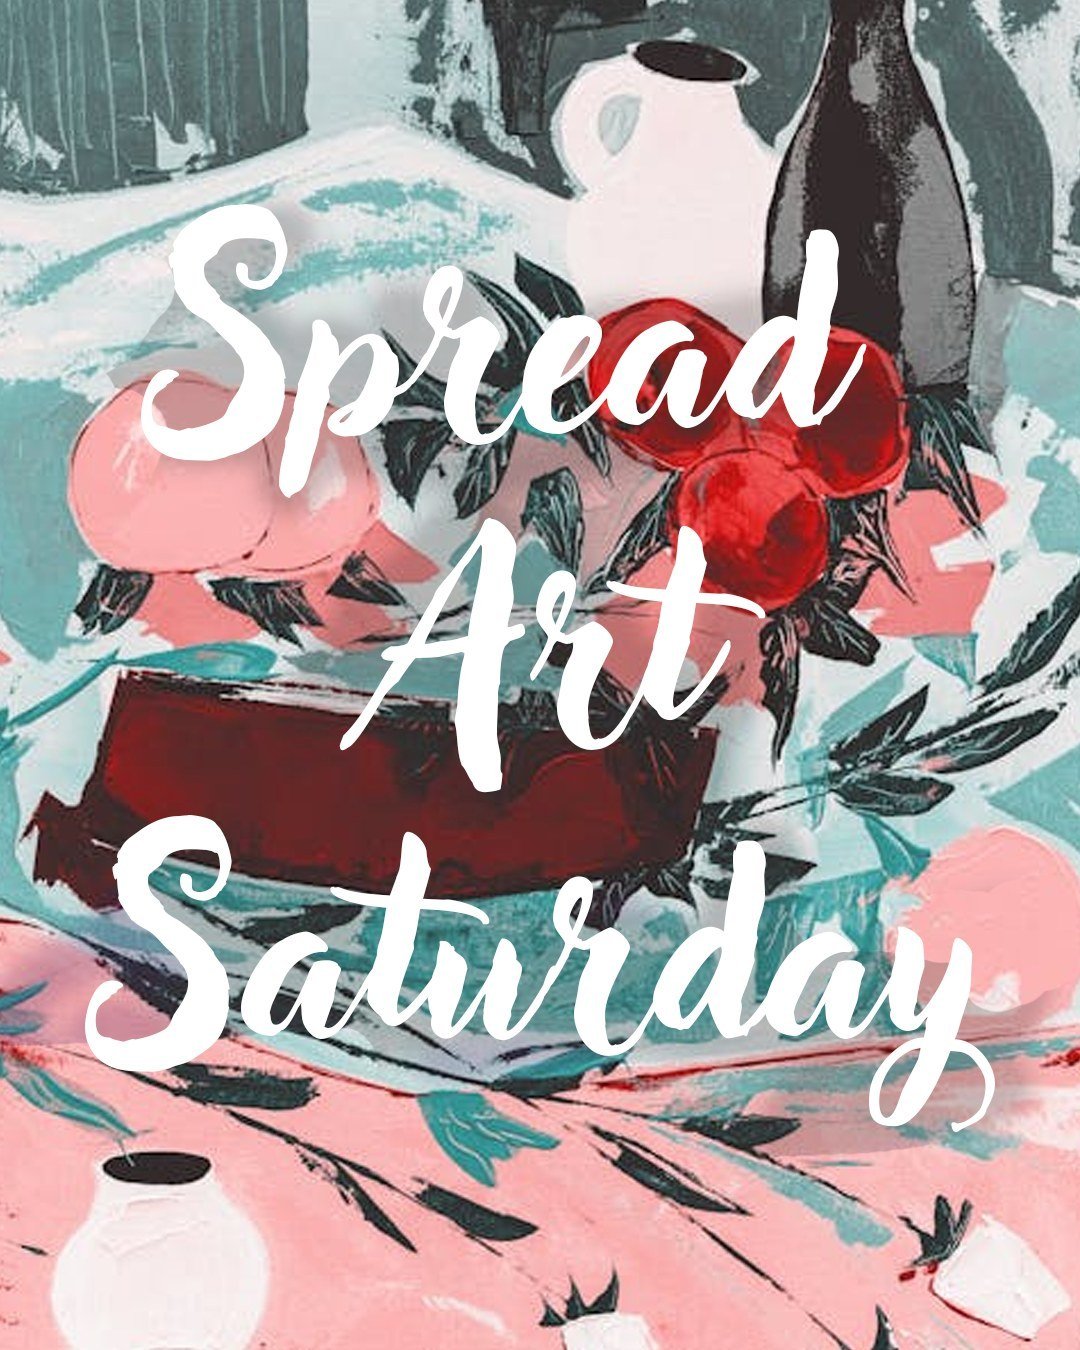 Happy Saturday! Have you seen local art recently that intrigued you? Maybe someone in your community would like it too! Take some time to spread art today.
#spreadart